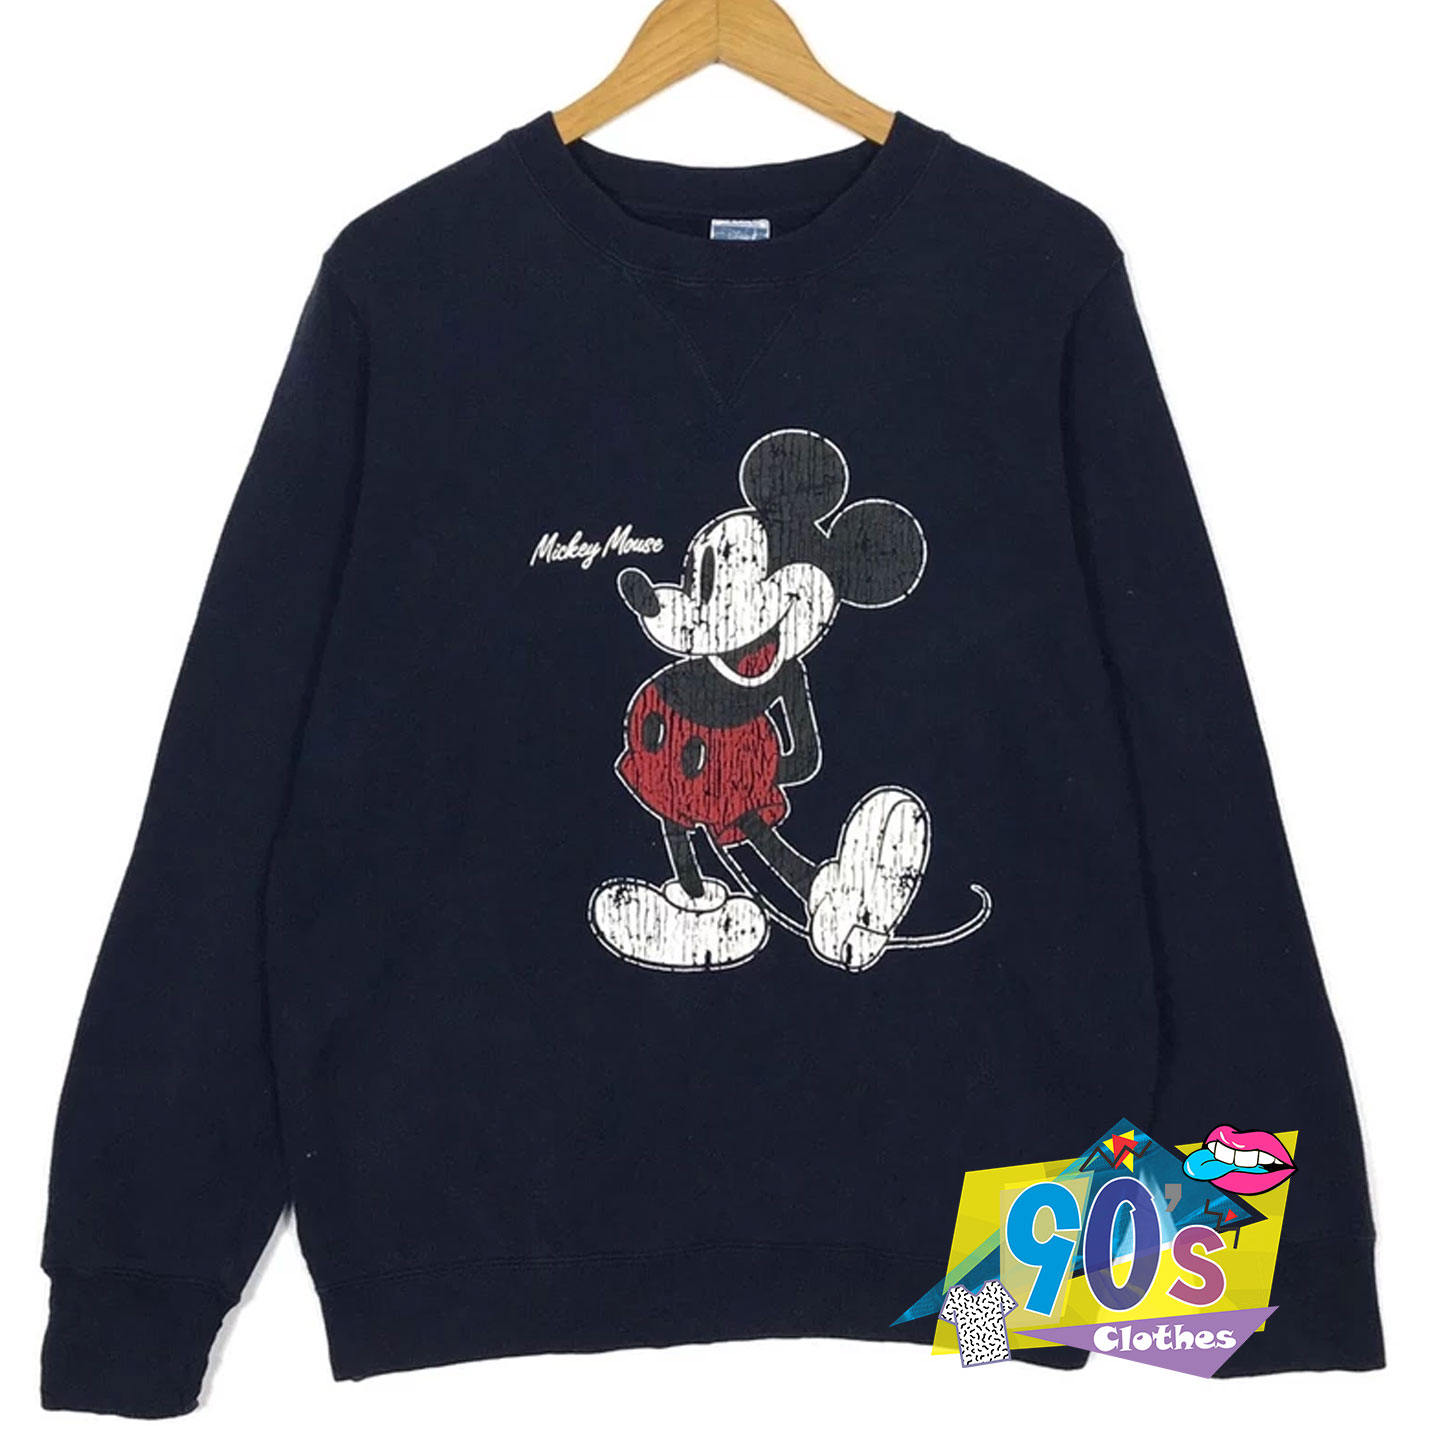 Vintage Mickey Mouse Grunge Sweatshirt - 90sclothes.com